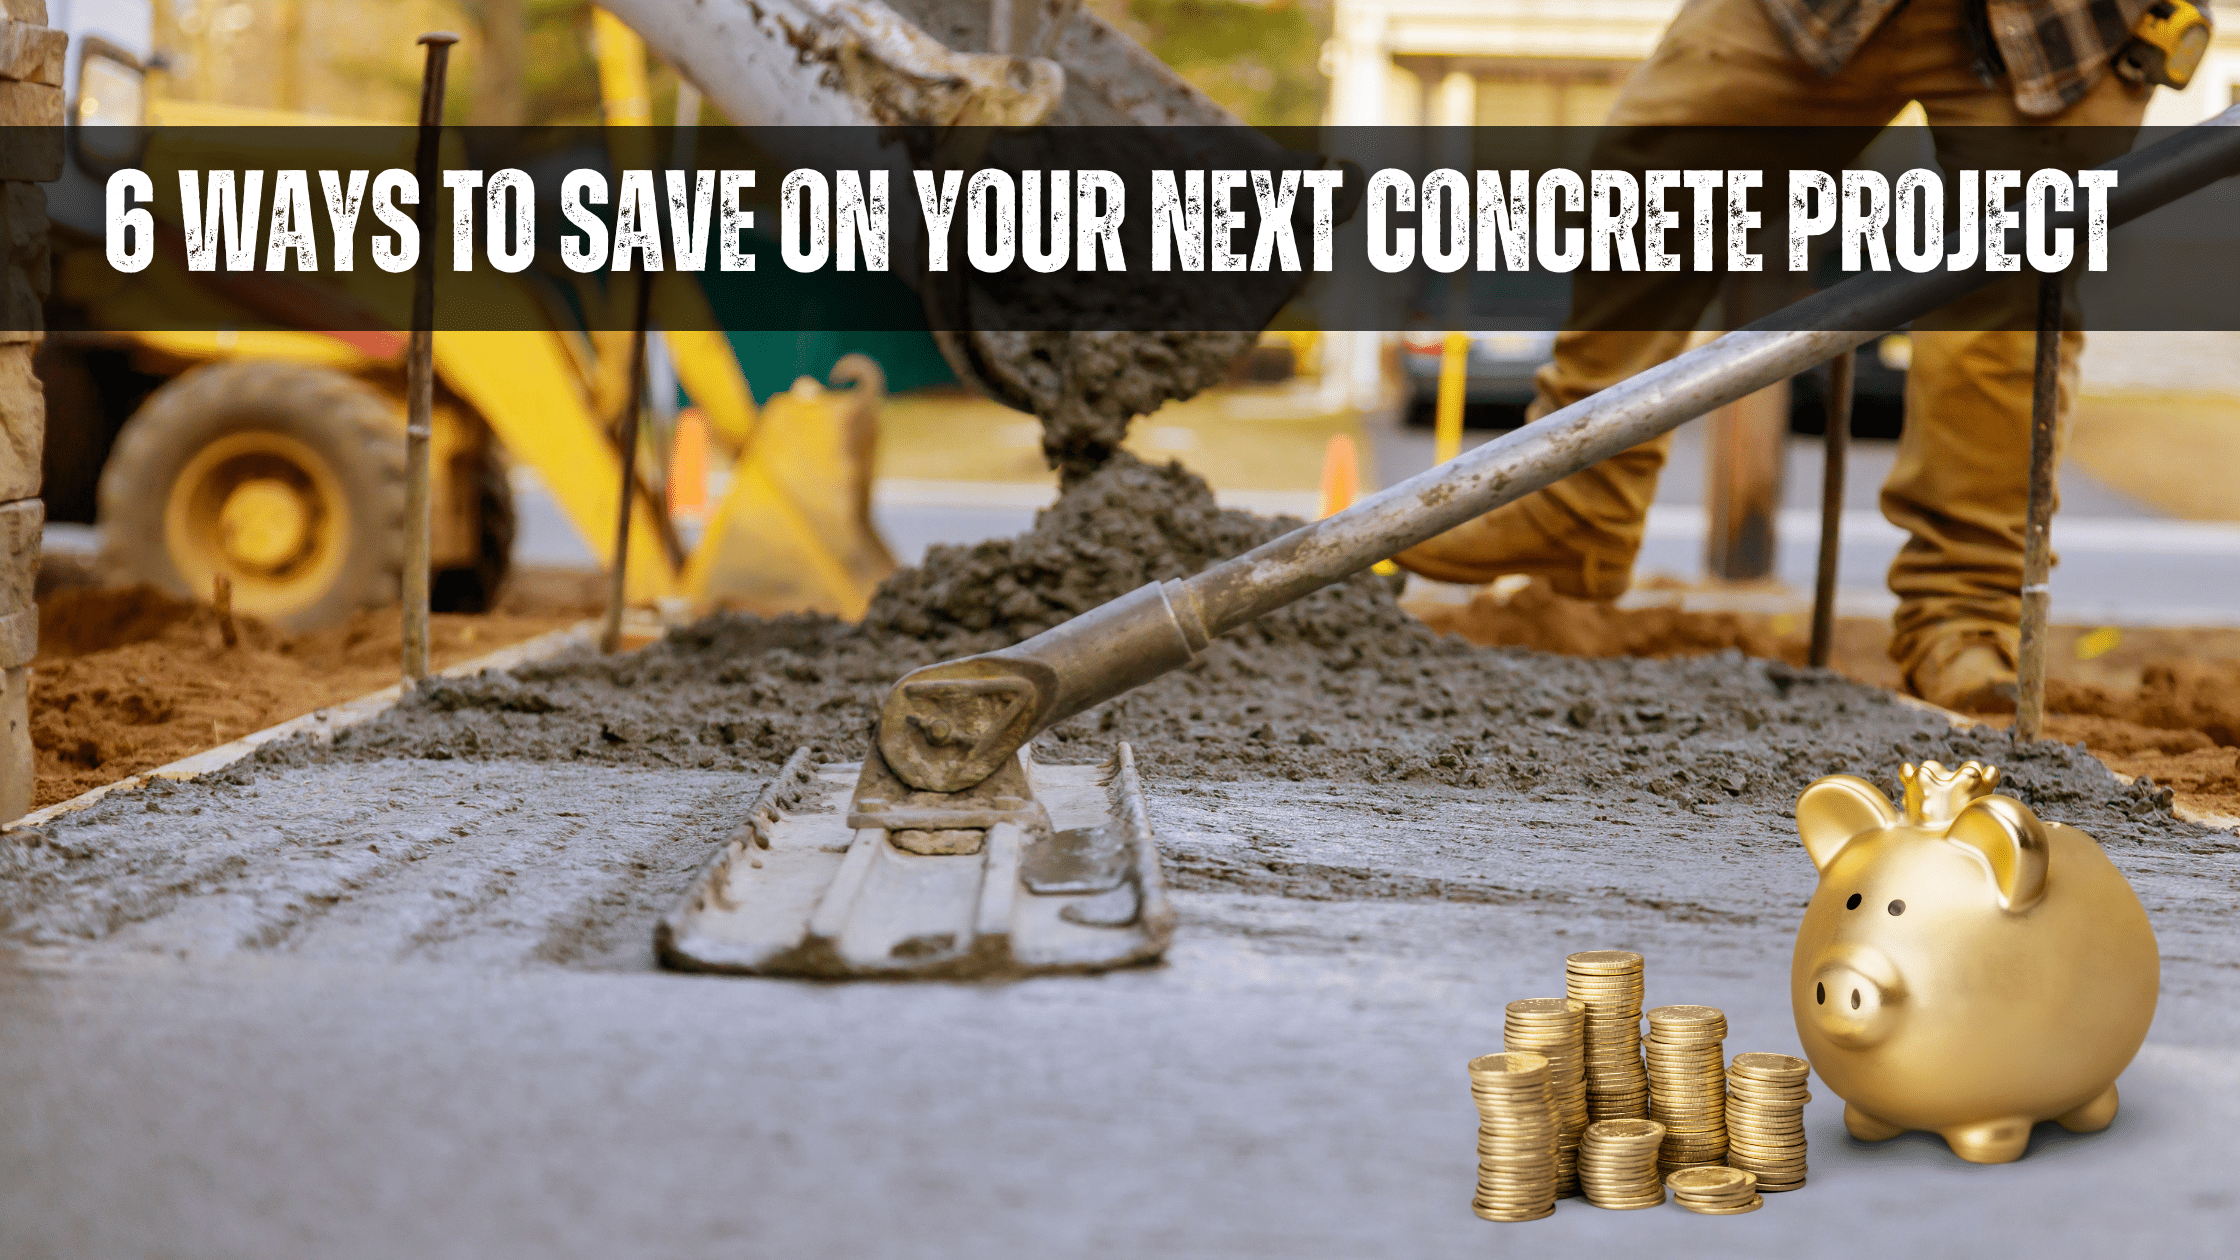 6 Ways to Save on Your Next Concrete Project